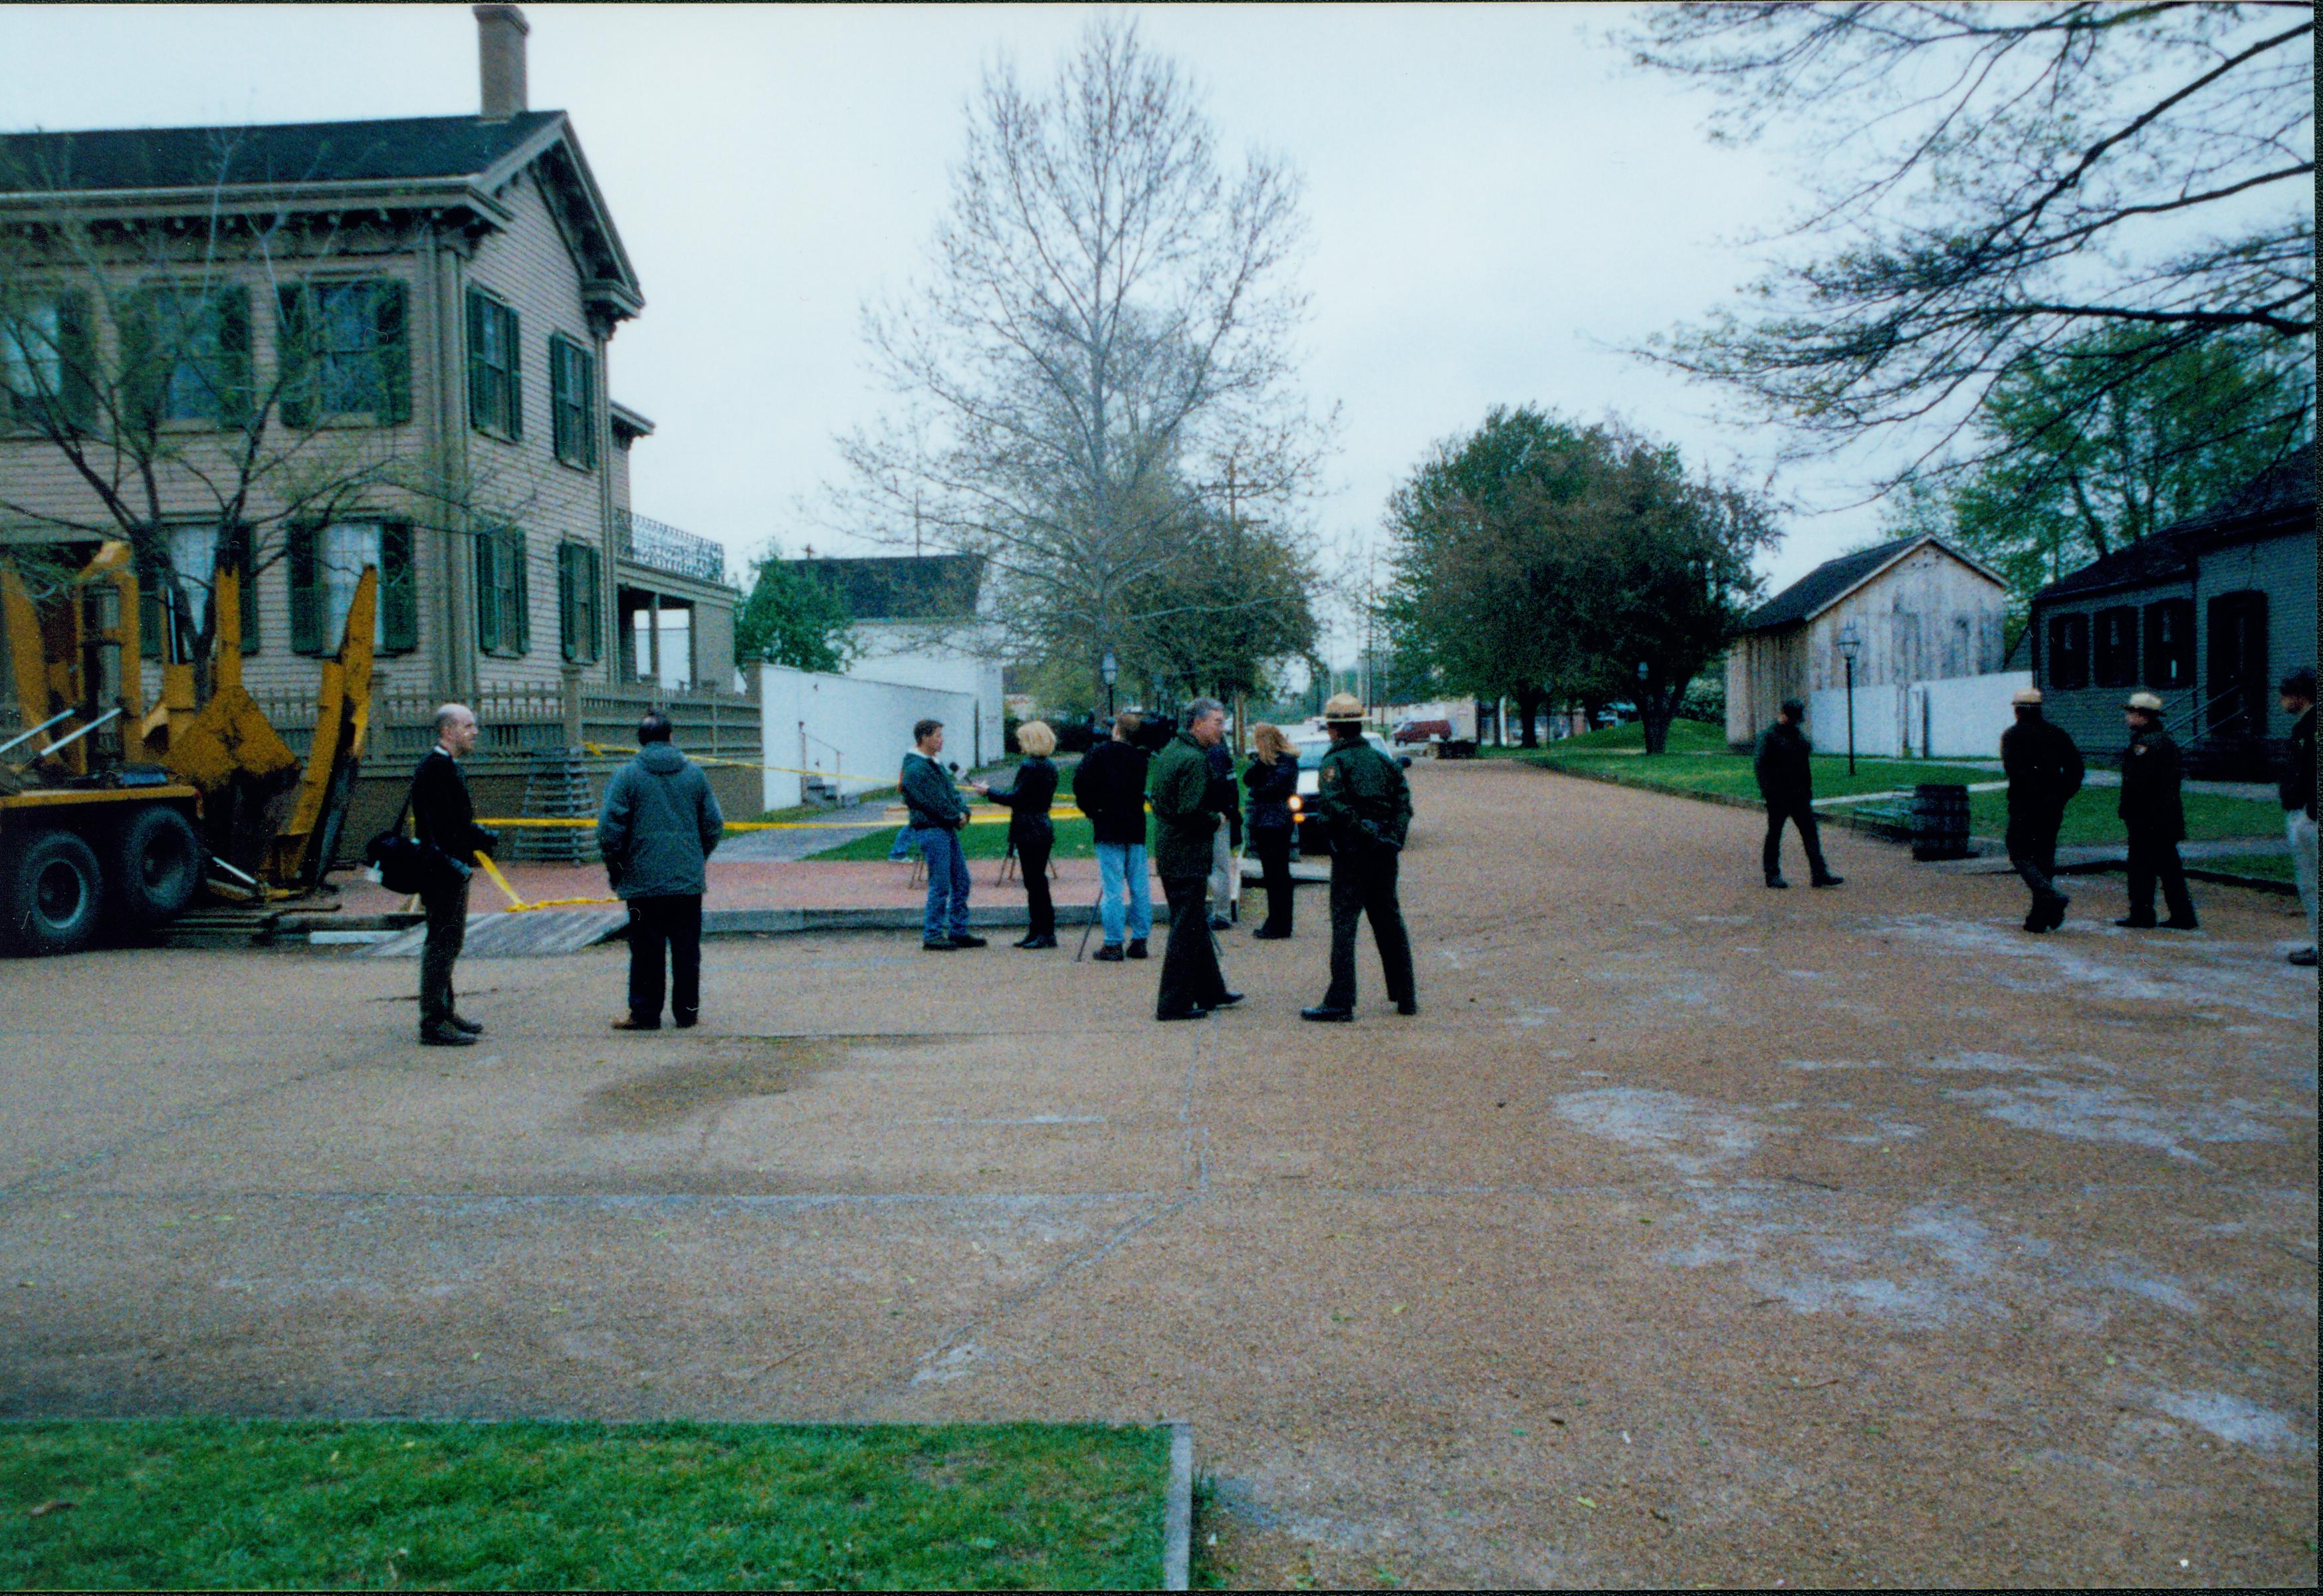 Elm tree replacement - Media Coverage in front of Lincoln Home. Superintendent Norman Hellmers chats with LE ranger Pete Swisher while reports talk to nursery staff. Maintenance Worker Vee Pollock and rangers watch with visitors on right near Arnold House. Unpainted Arnold Barn on right. Lincoln Home and Lincoln Barn on left.  Looking East from 8th and Jackson Street intersection Elm tree, Lincoln Home, Arnold, Arnold Barn, 8th Street, Jackson Street, staff, reporters, Pleasant Nursery